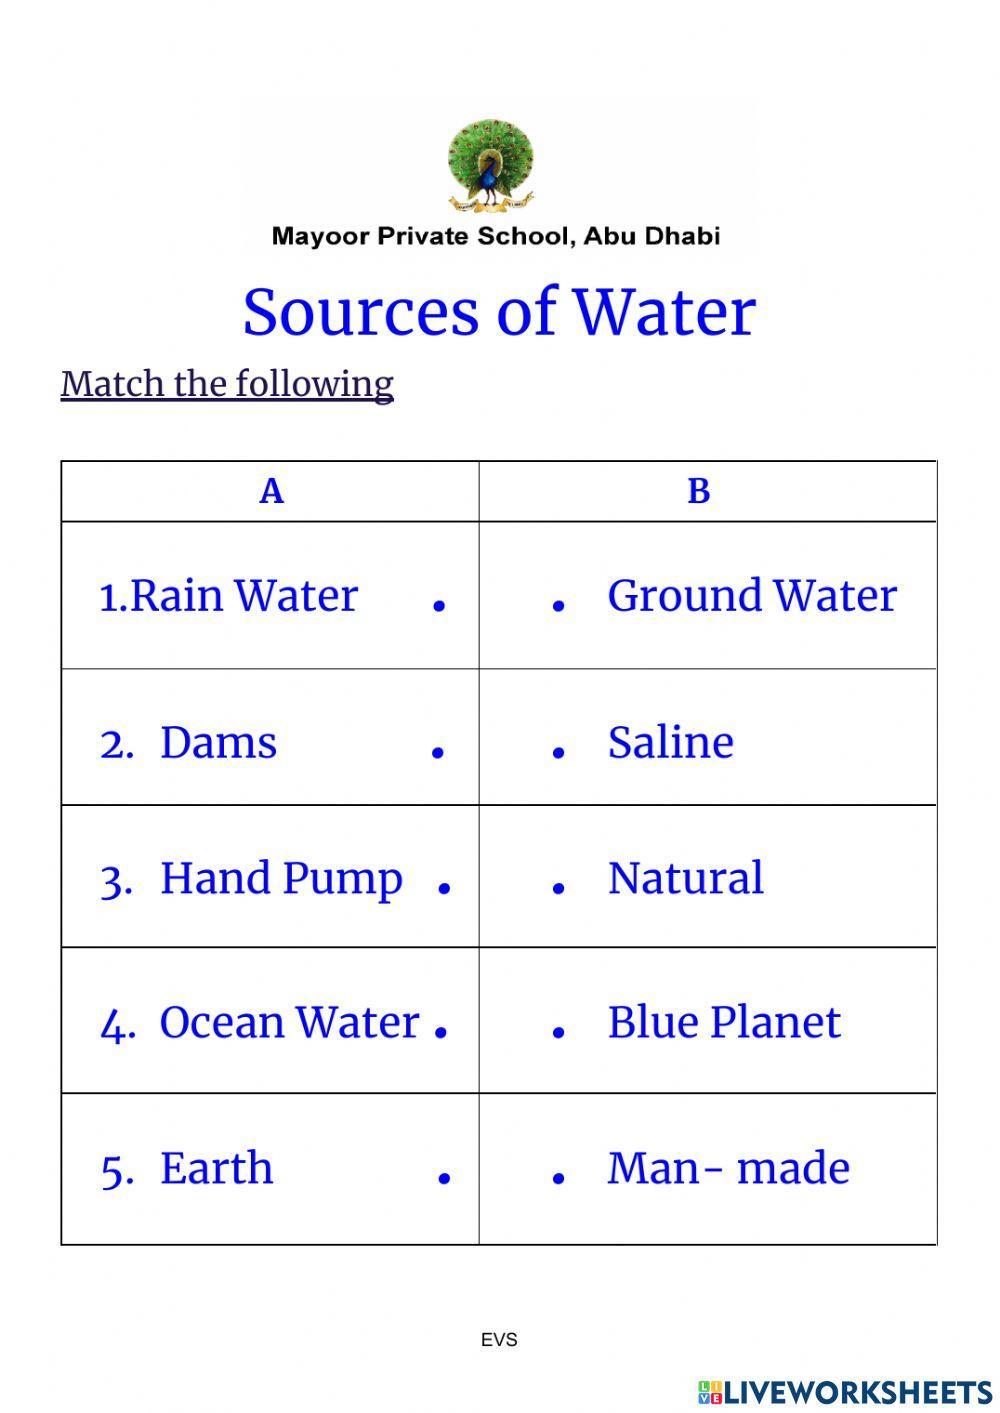 Water - Sources